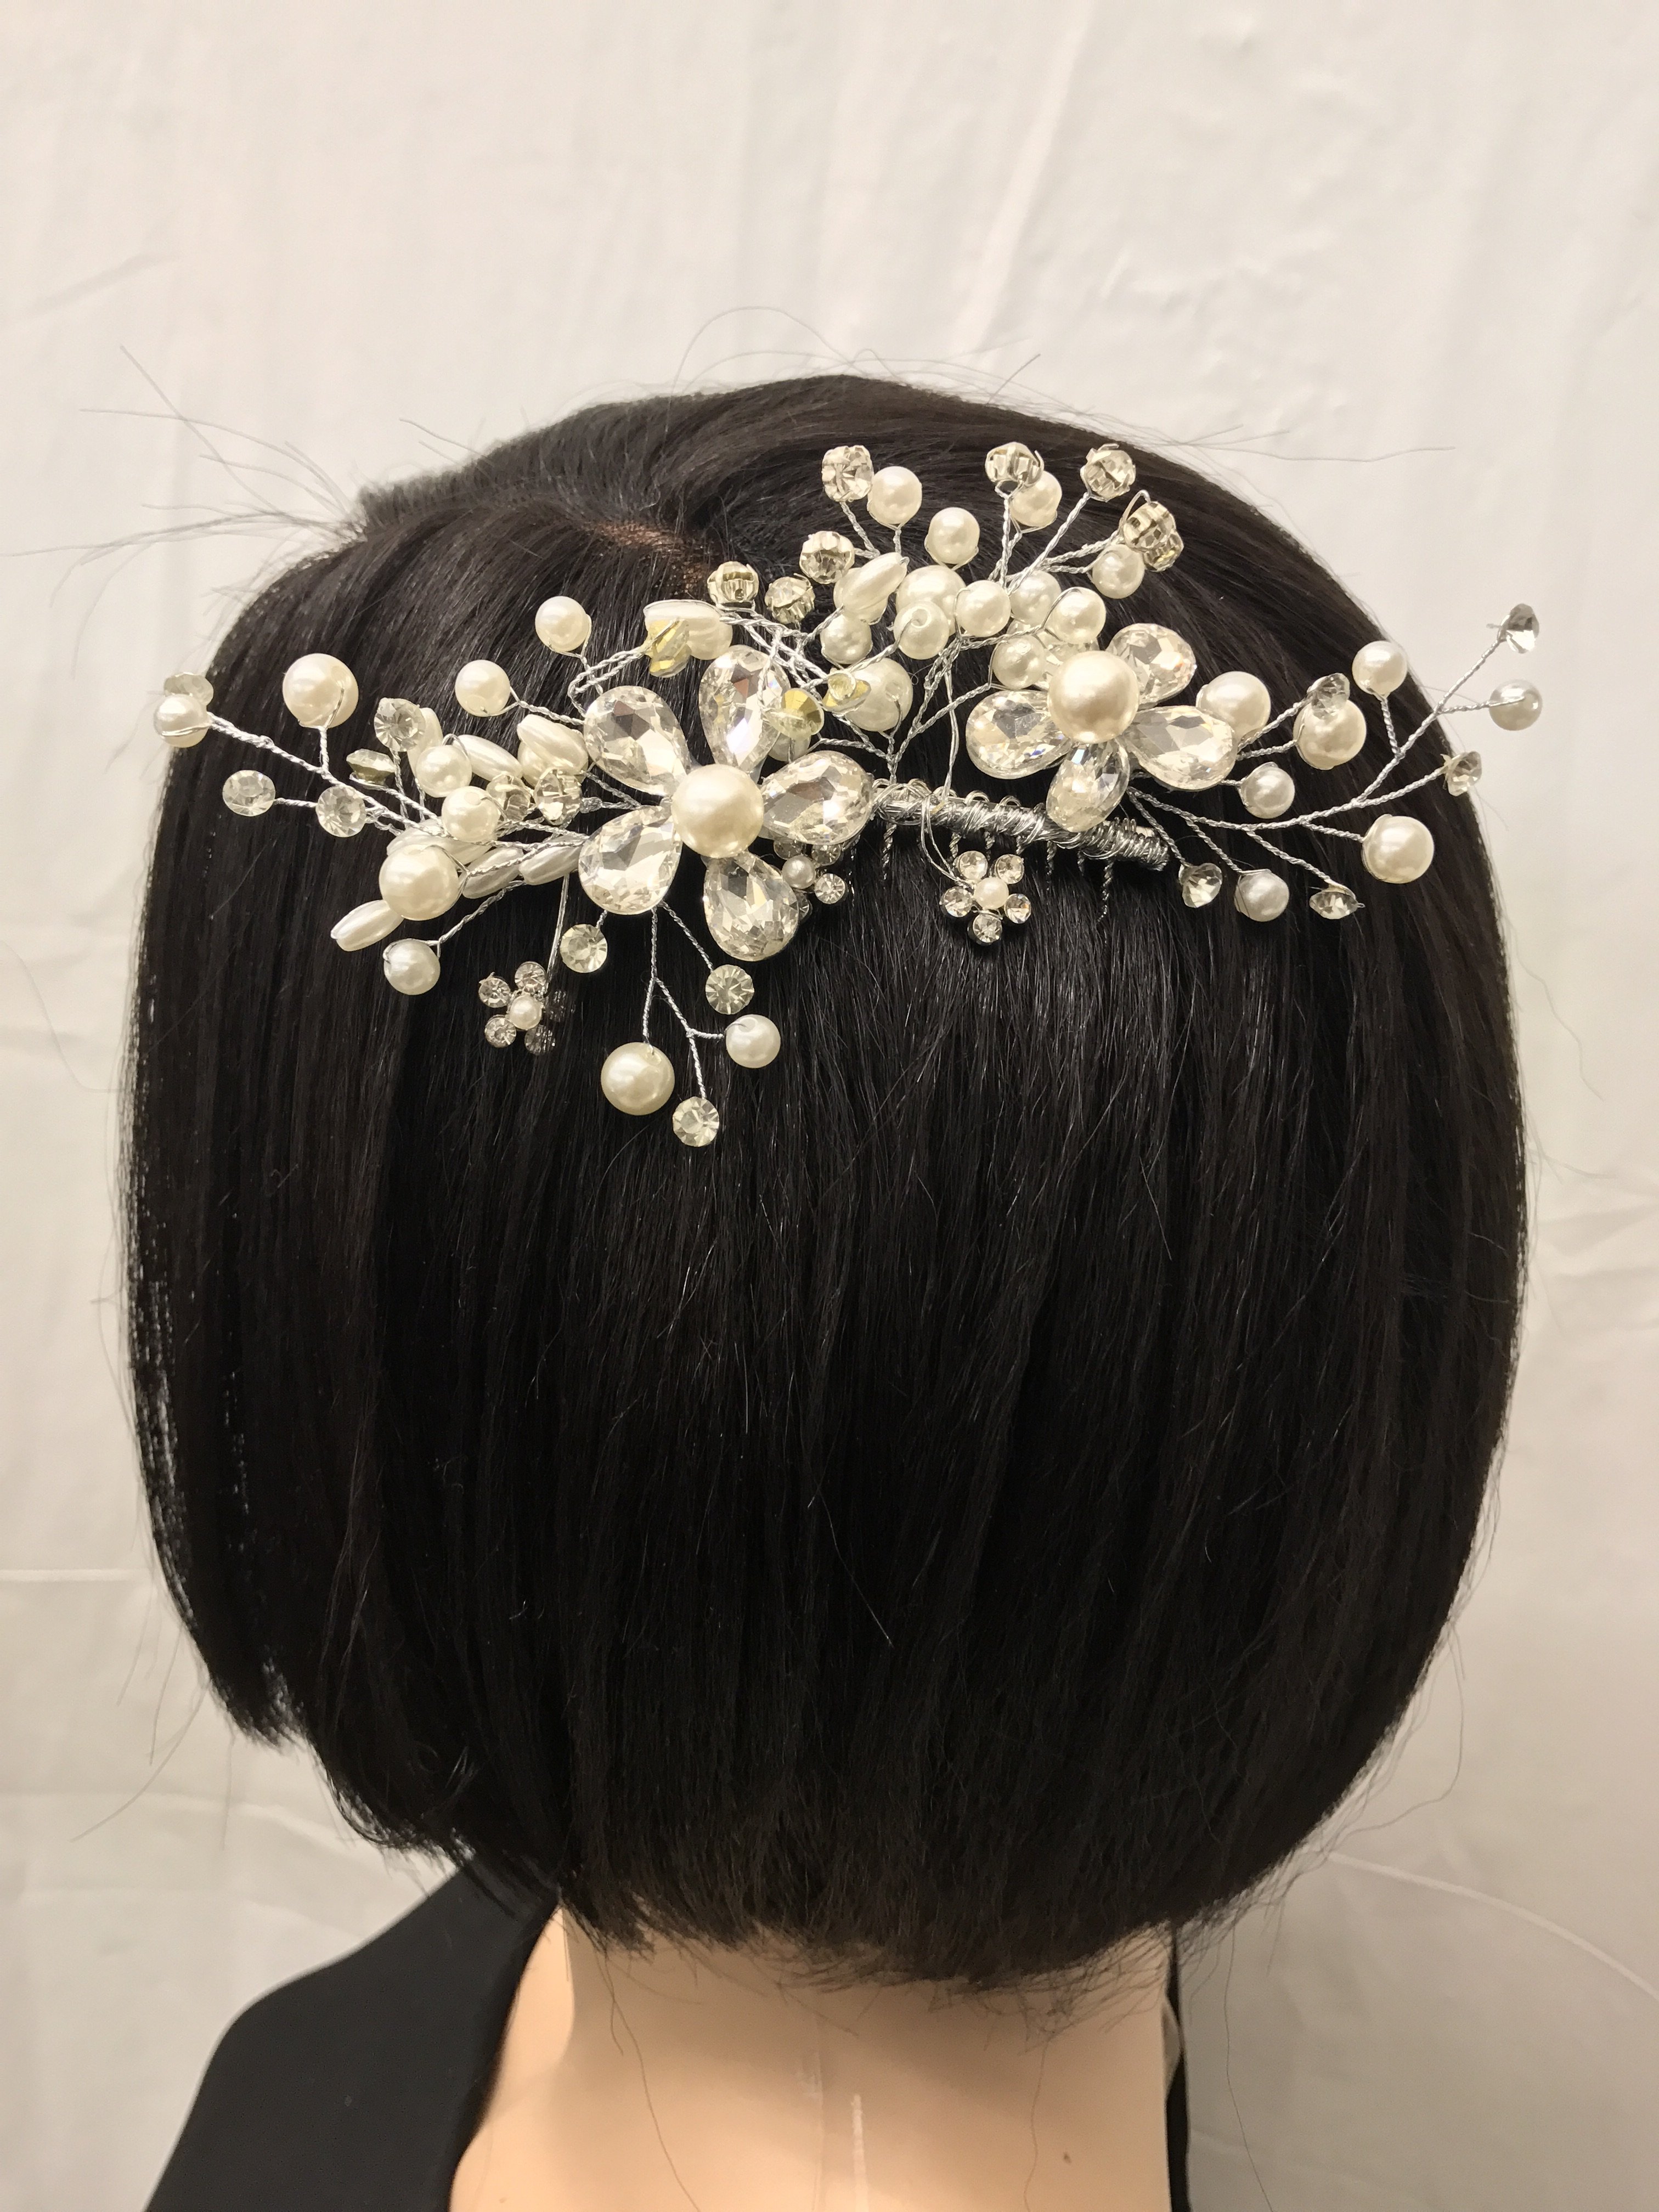 Silver Metal Hair Comb With Faceted Stone Flowers & Branches Of Crystal Stones / Pearl Accents